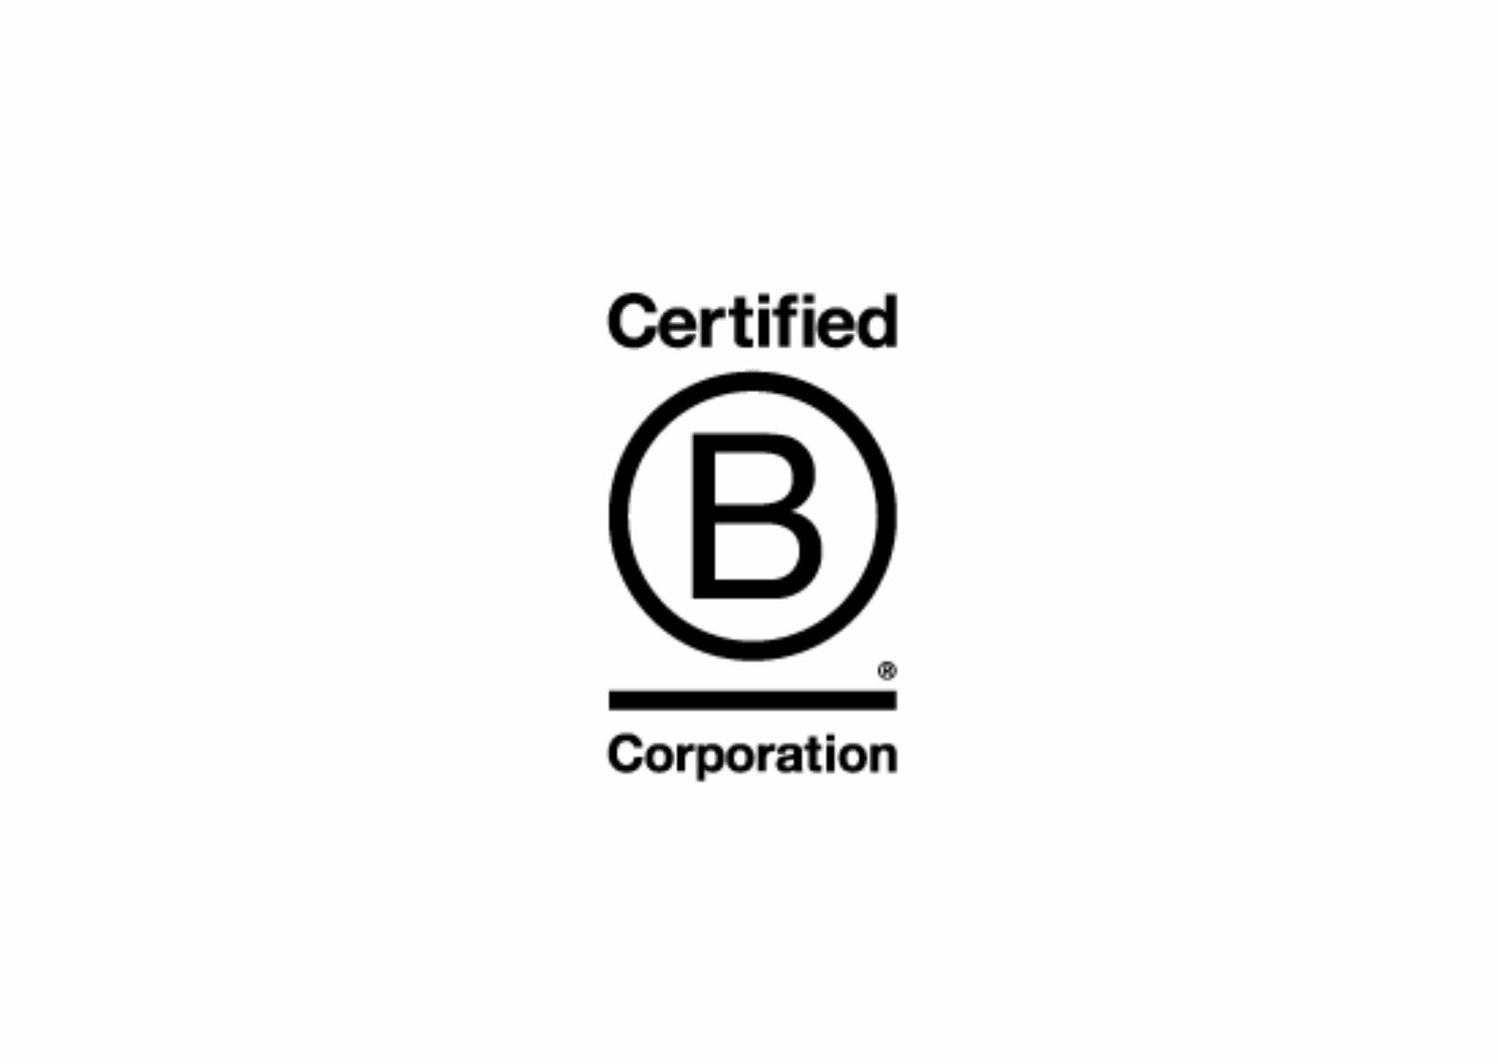 rePlated in a certified BCorp